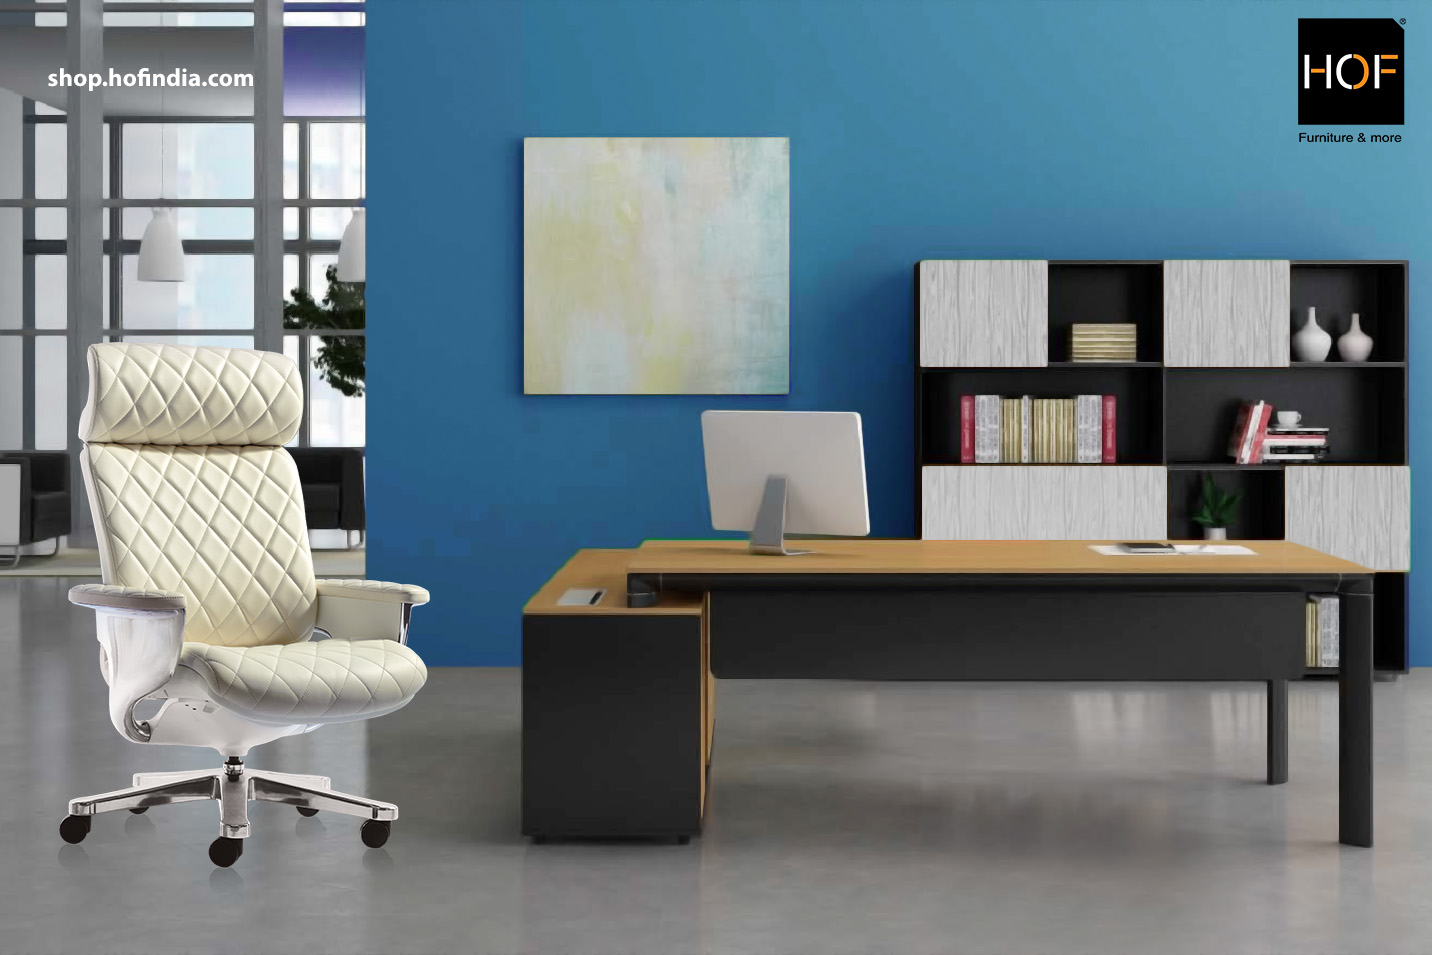 Learn How the White and Blue Colors Impact Your Office Design | HOF India